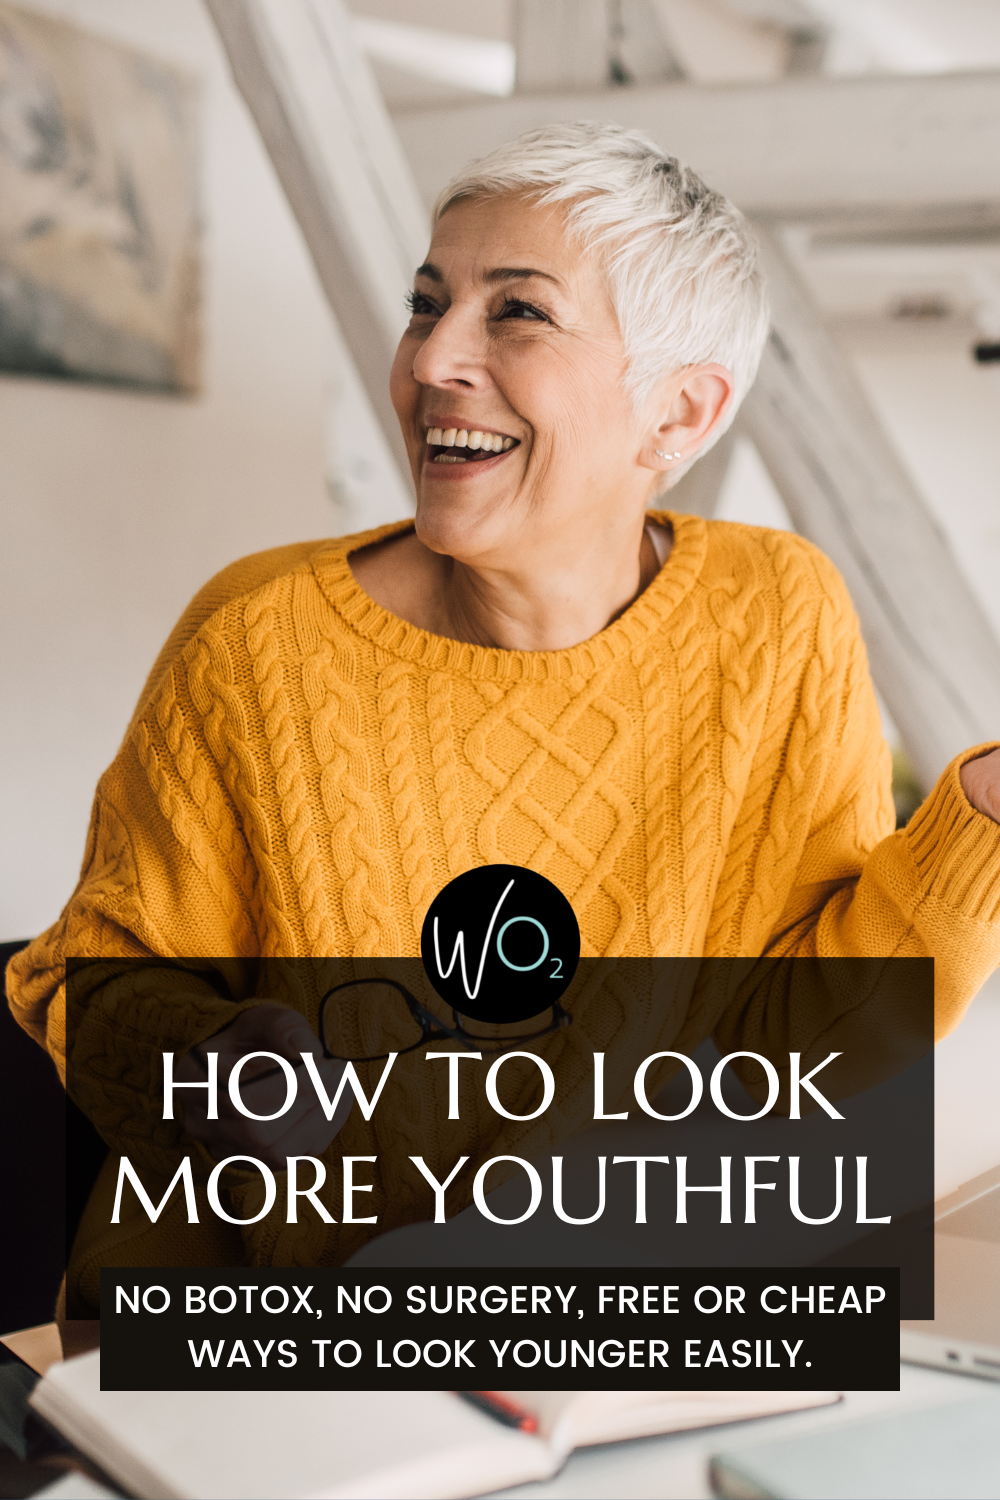 How to Look More Youthful: 6 Tips That Don’t Include Injectibles And Won’t Break the Bank